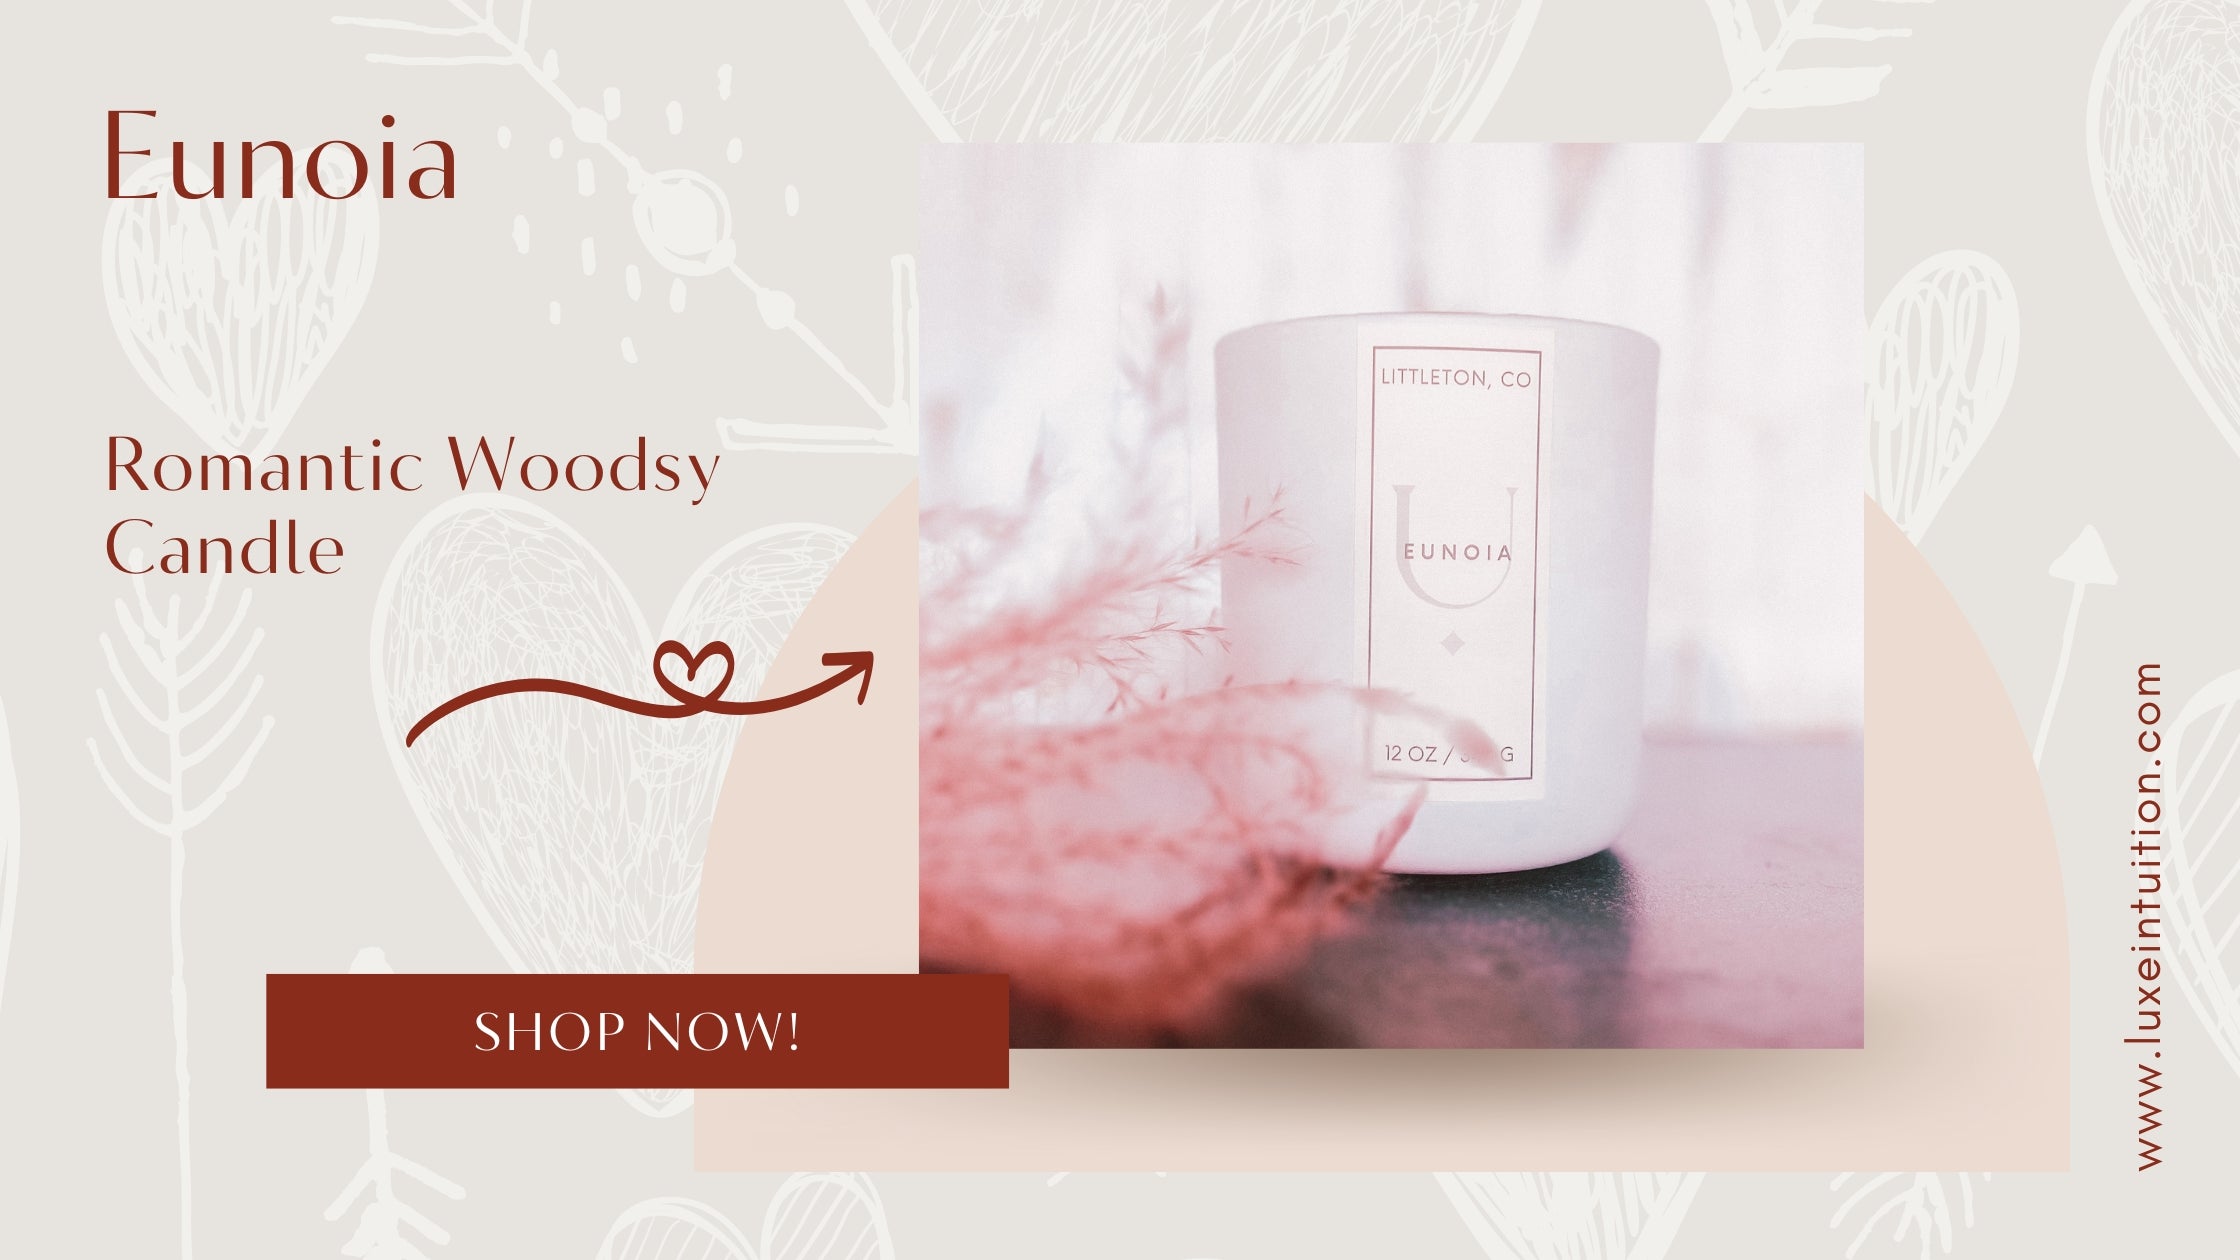 Eunoia Candle | Romantic Woodsy Scented Candle | Wooden Wick Candle